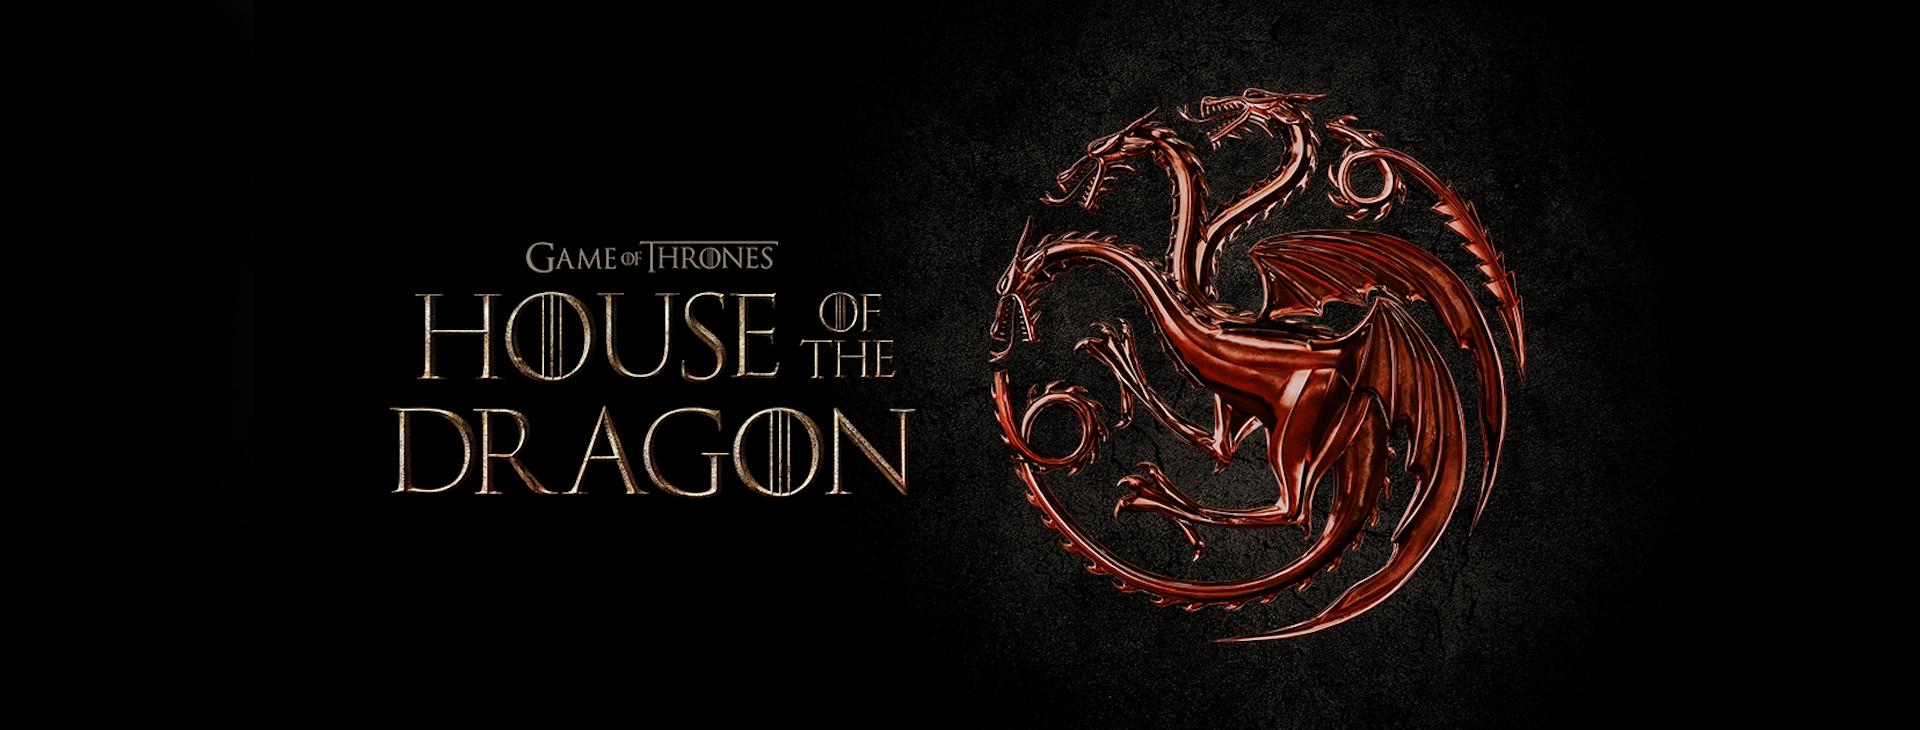 House of the dragon HD wallpapers  Pxfuel